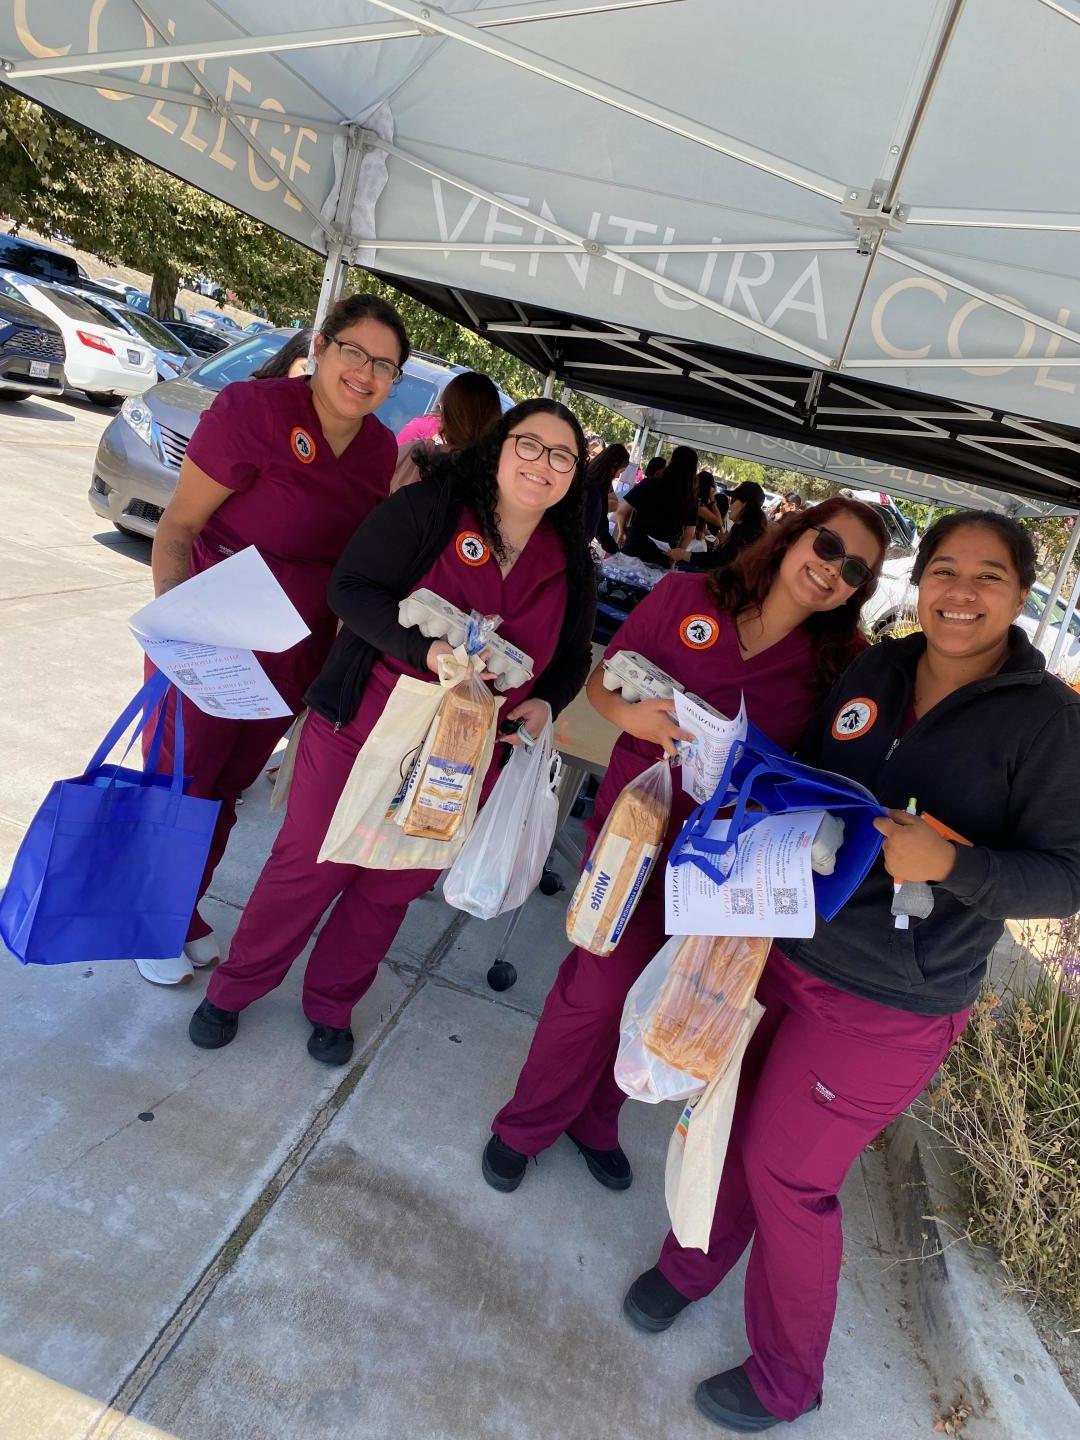 Vet Tech students holding their free groceries